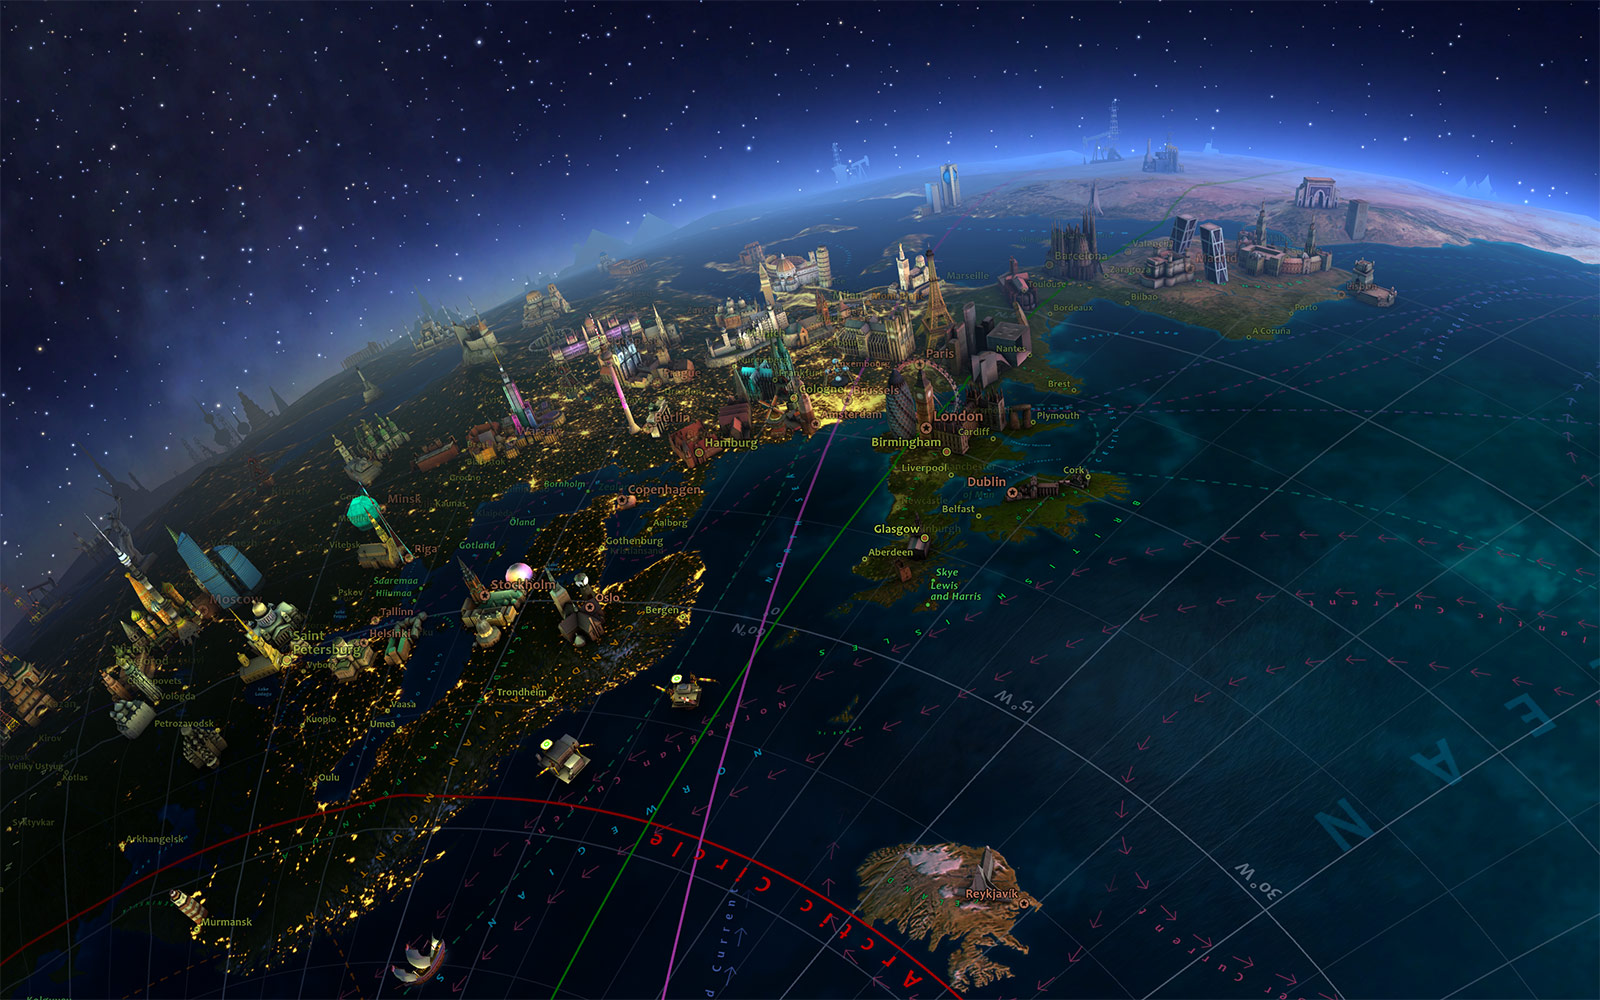 Earth 3D Space Tour screensaver 1.1 serial key or number